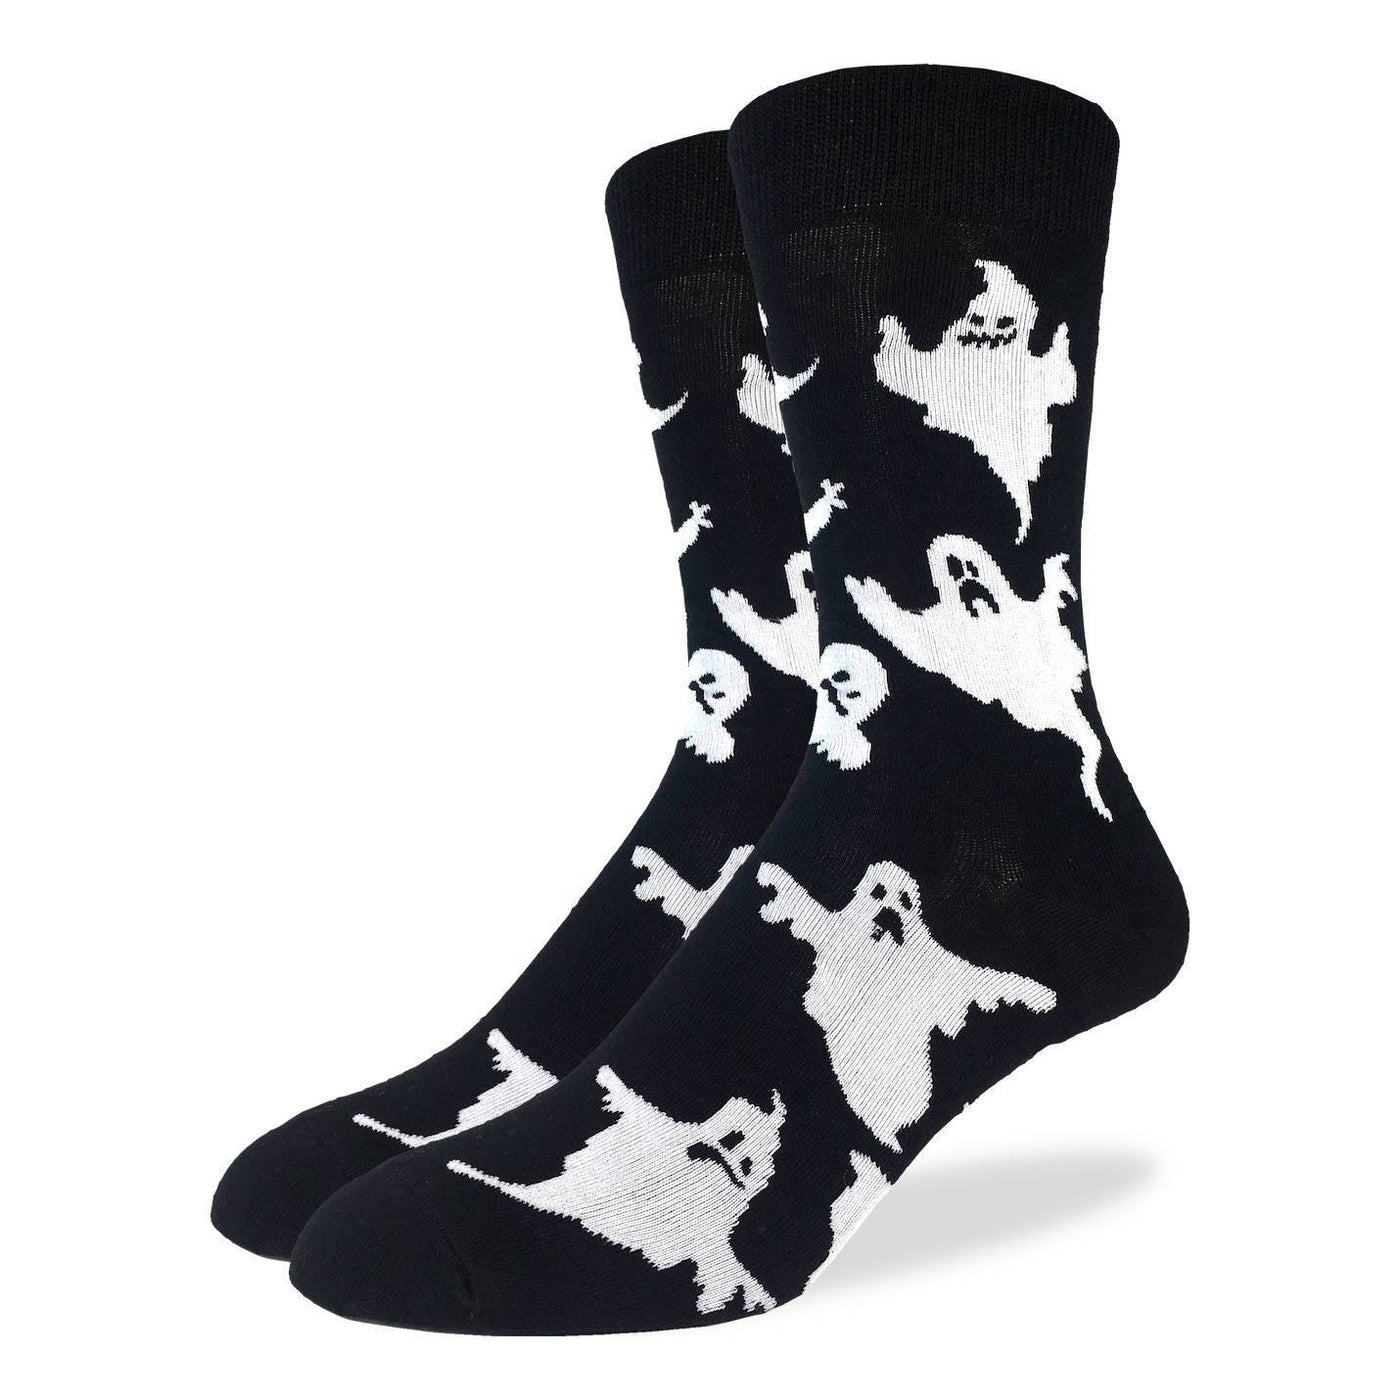 "Ghost" Cotton Crew Socks by Good Luck Sock